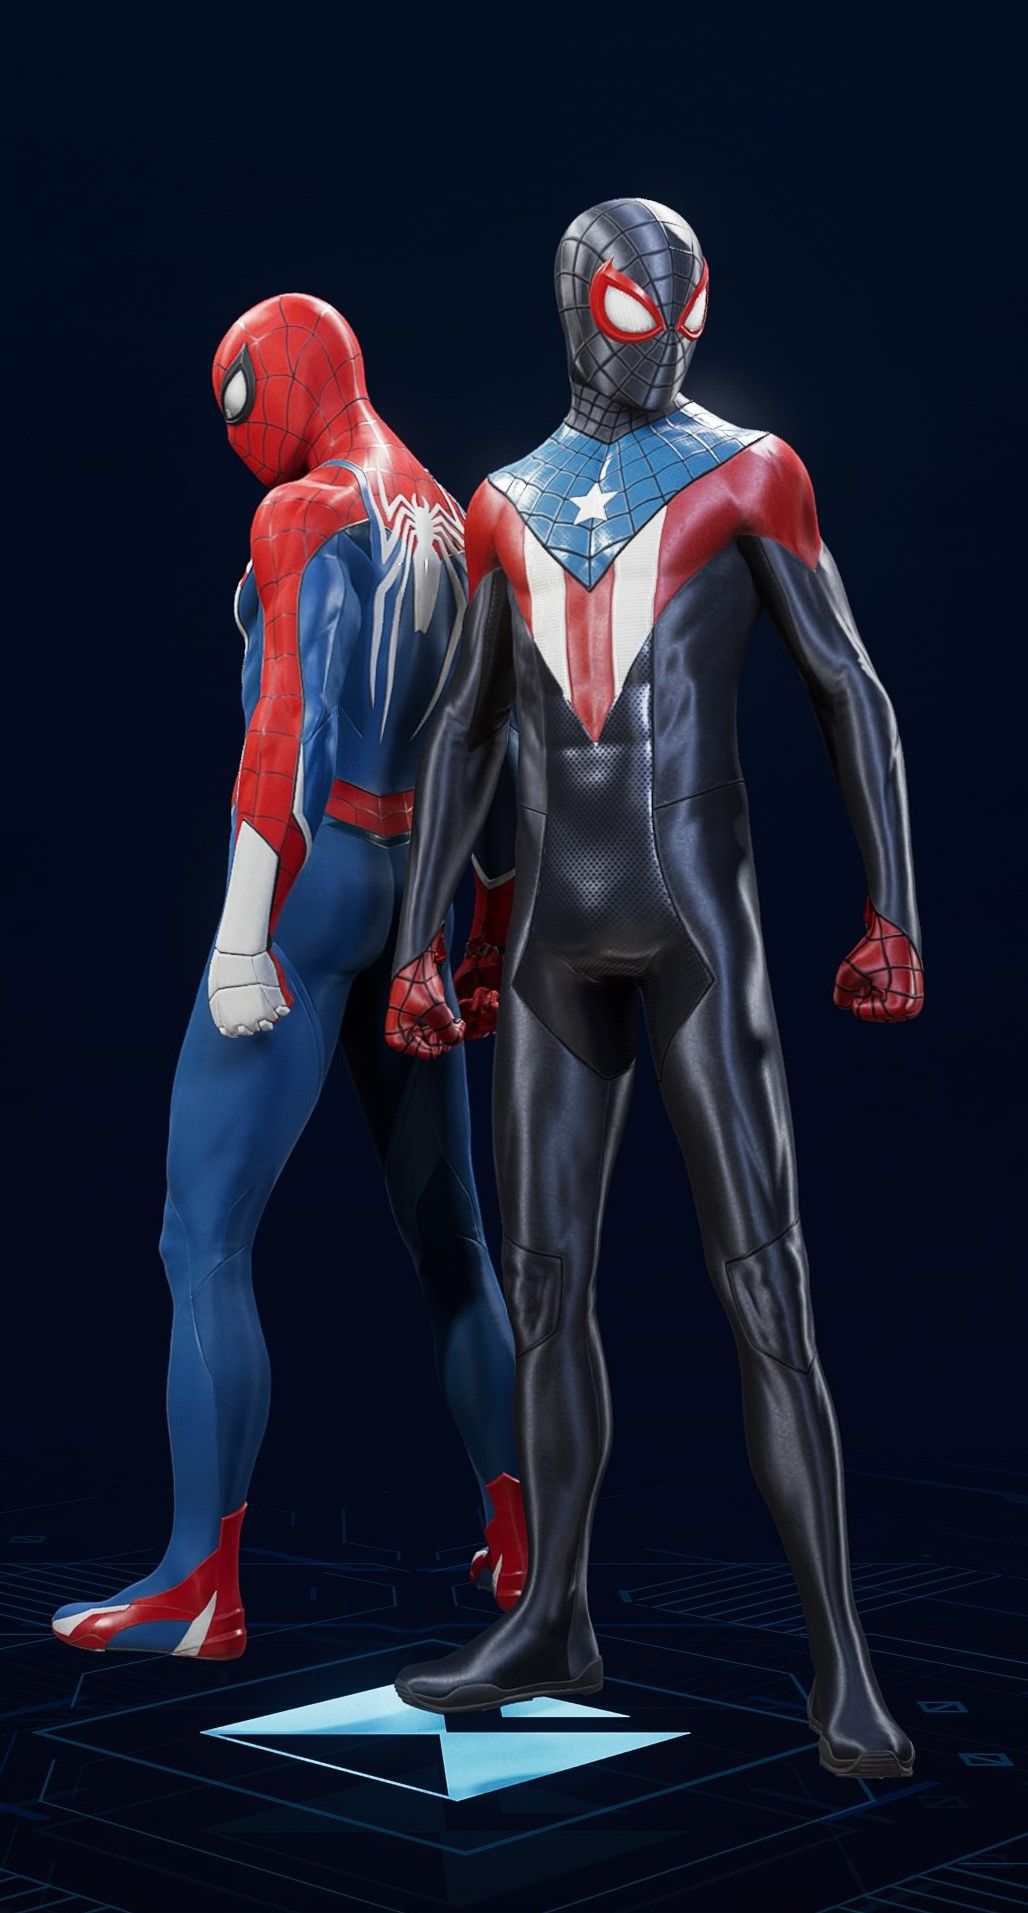 Miles Morales stands in his Boricua Suit in the suit selection screen of Spider-Man 2.